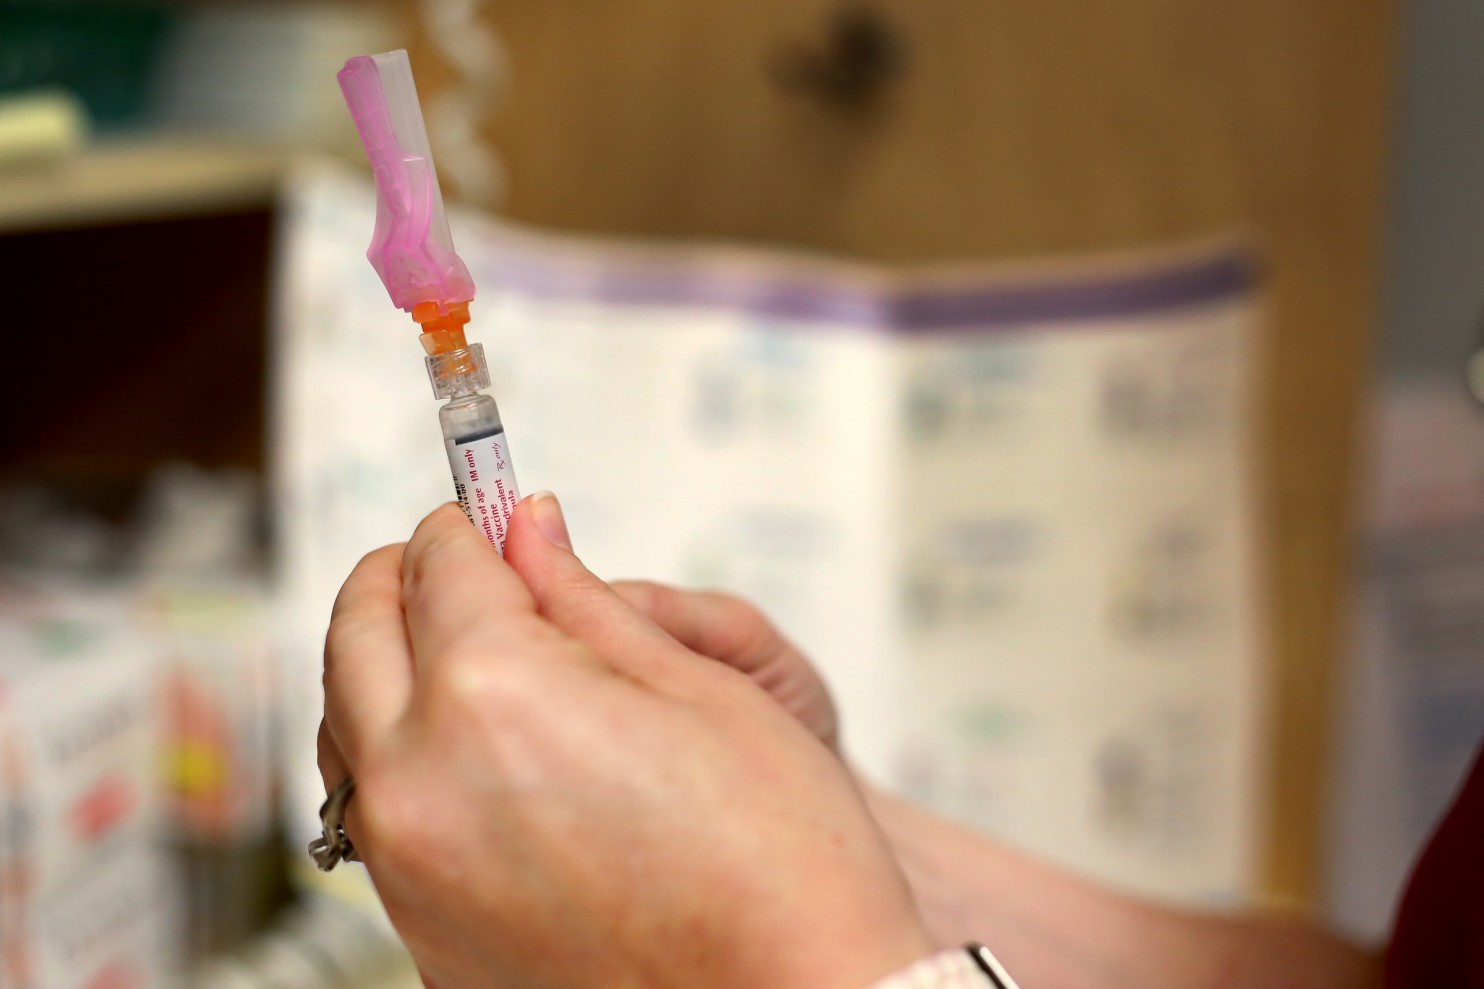 Oregon vaccine rate improves for first time in 15 years